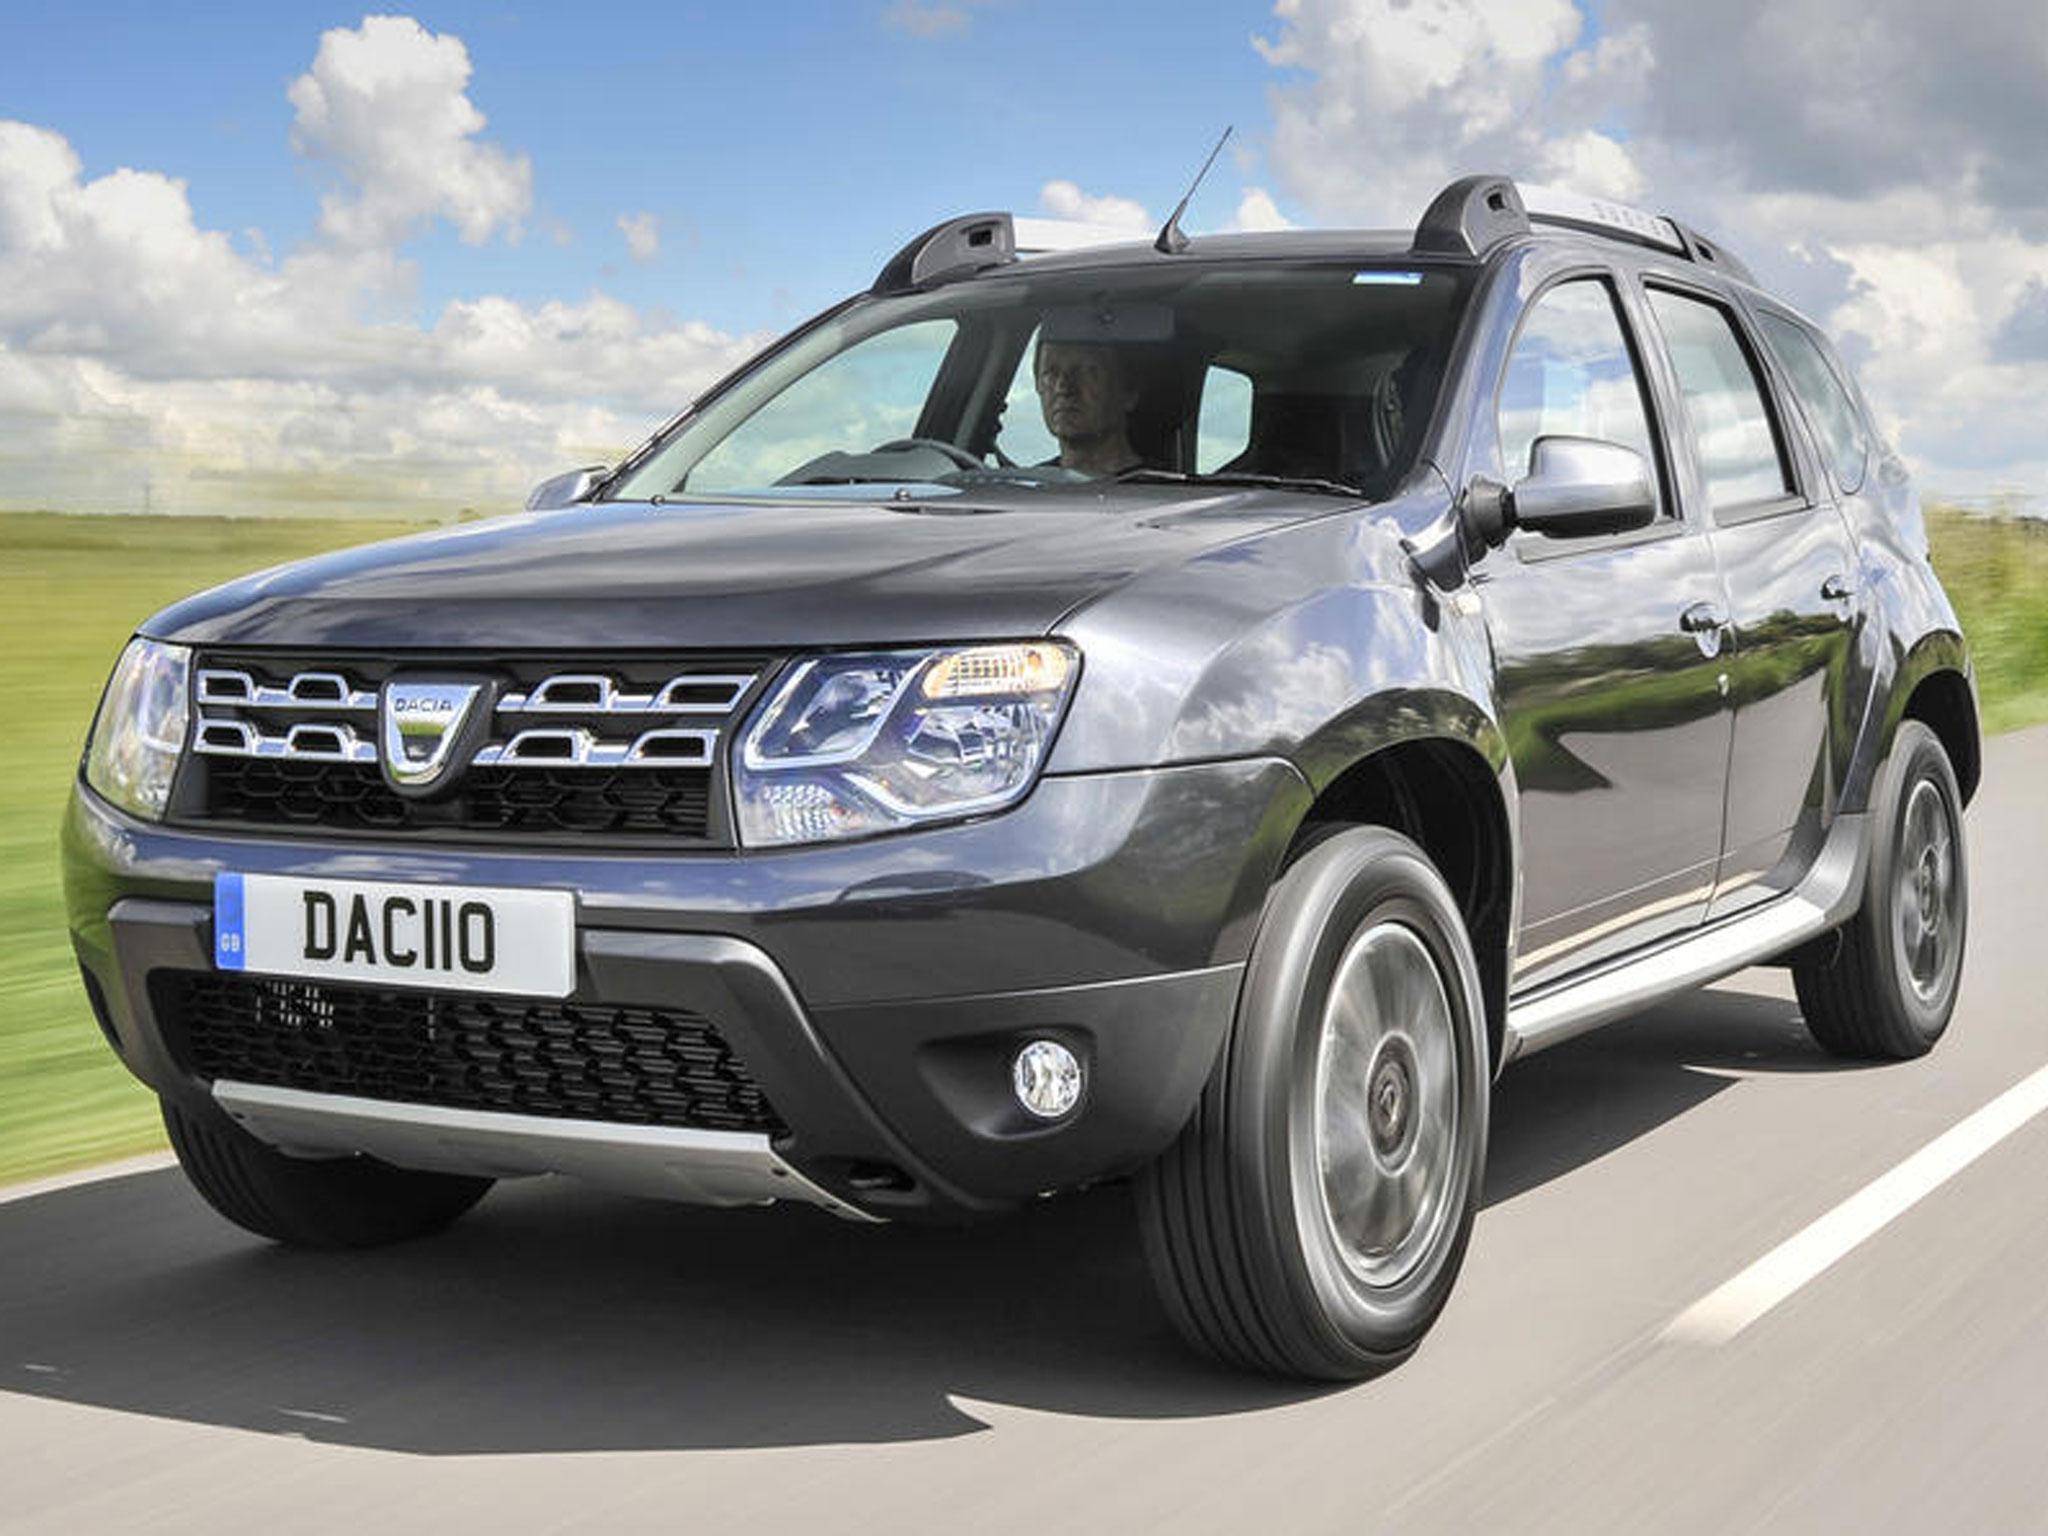 Dacia Duster: Top-value SUV gets new petrol engine and range-topping trim, The Independent